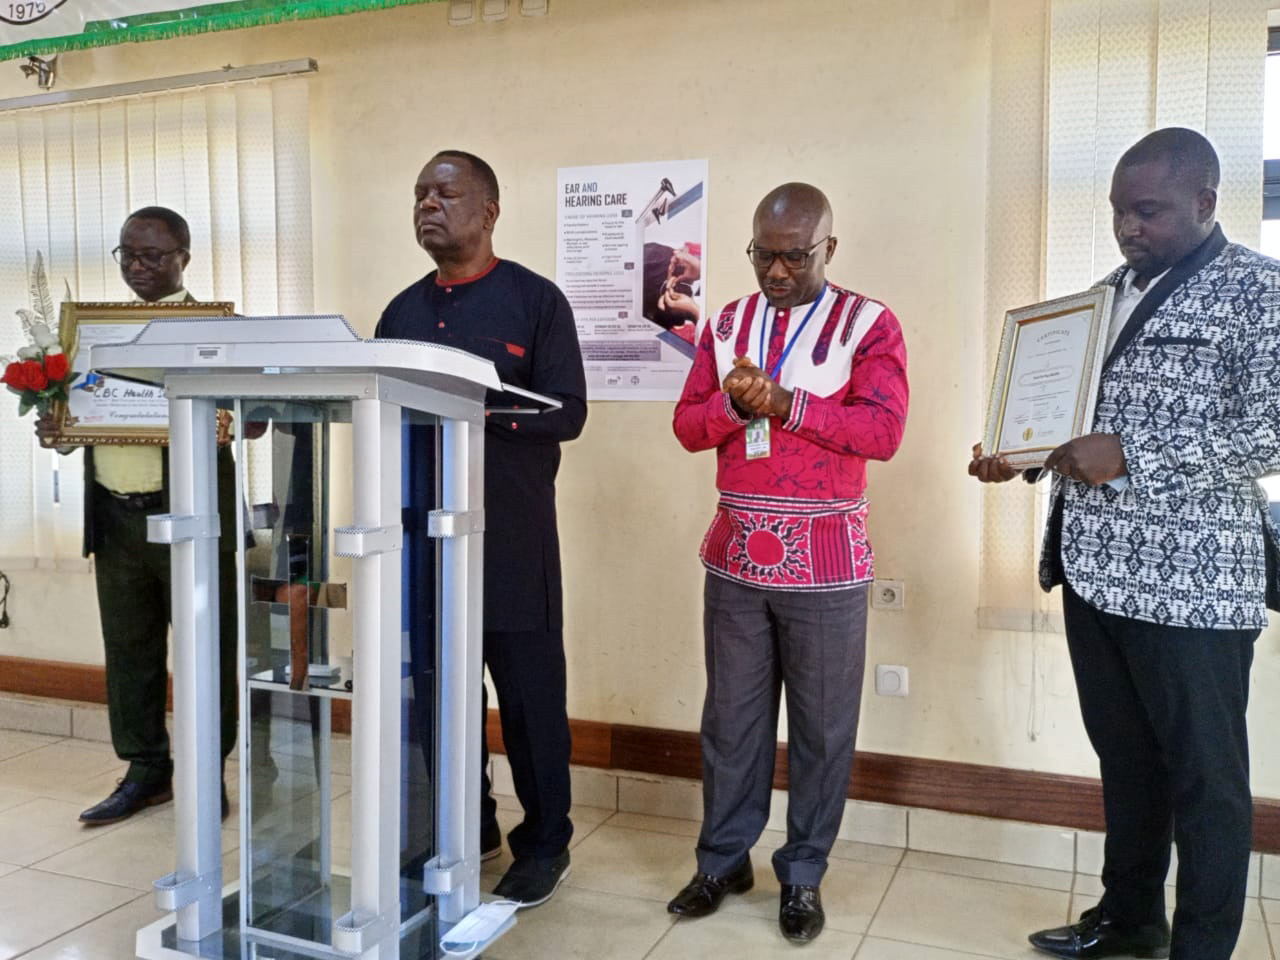 CBC Health Services tend awards to God for sustaining the service